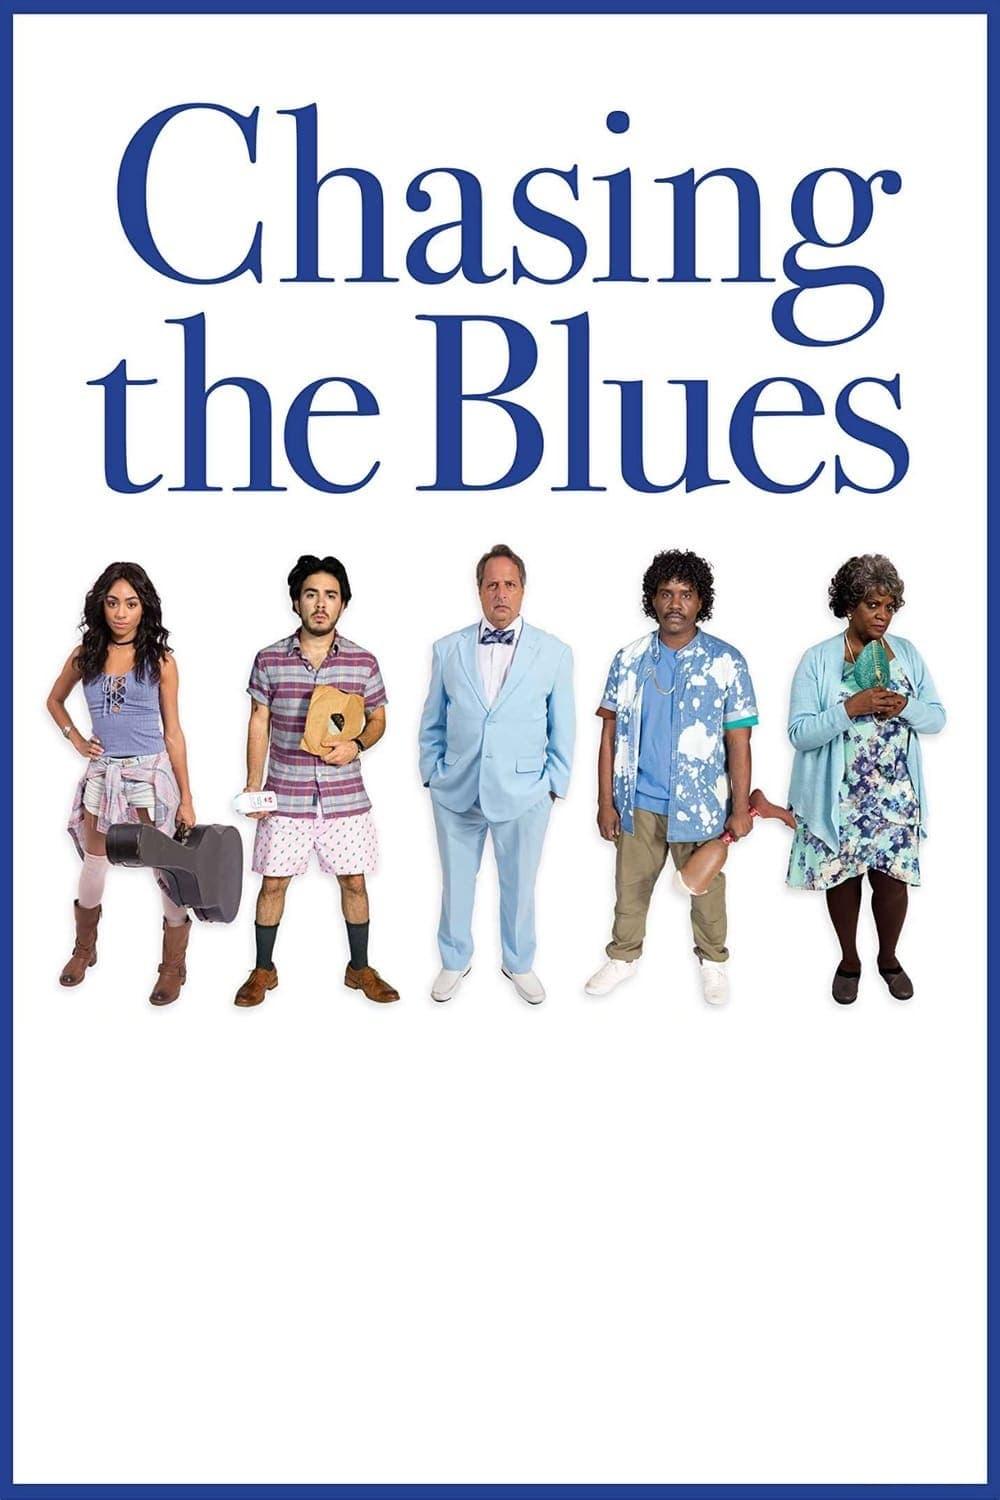 Chasing the Blues poster